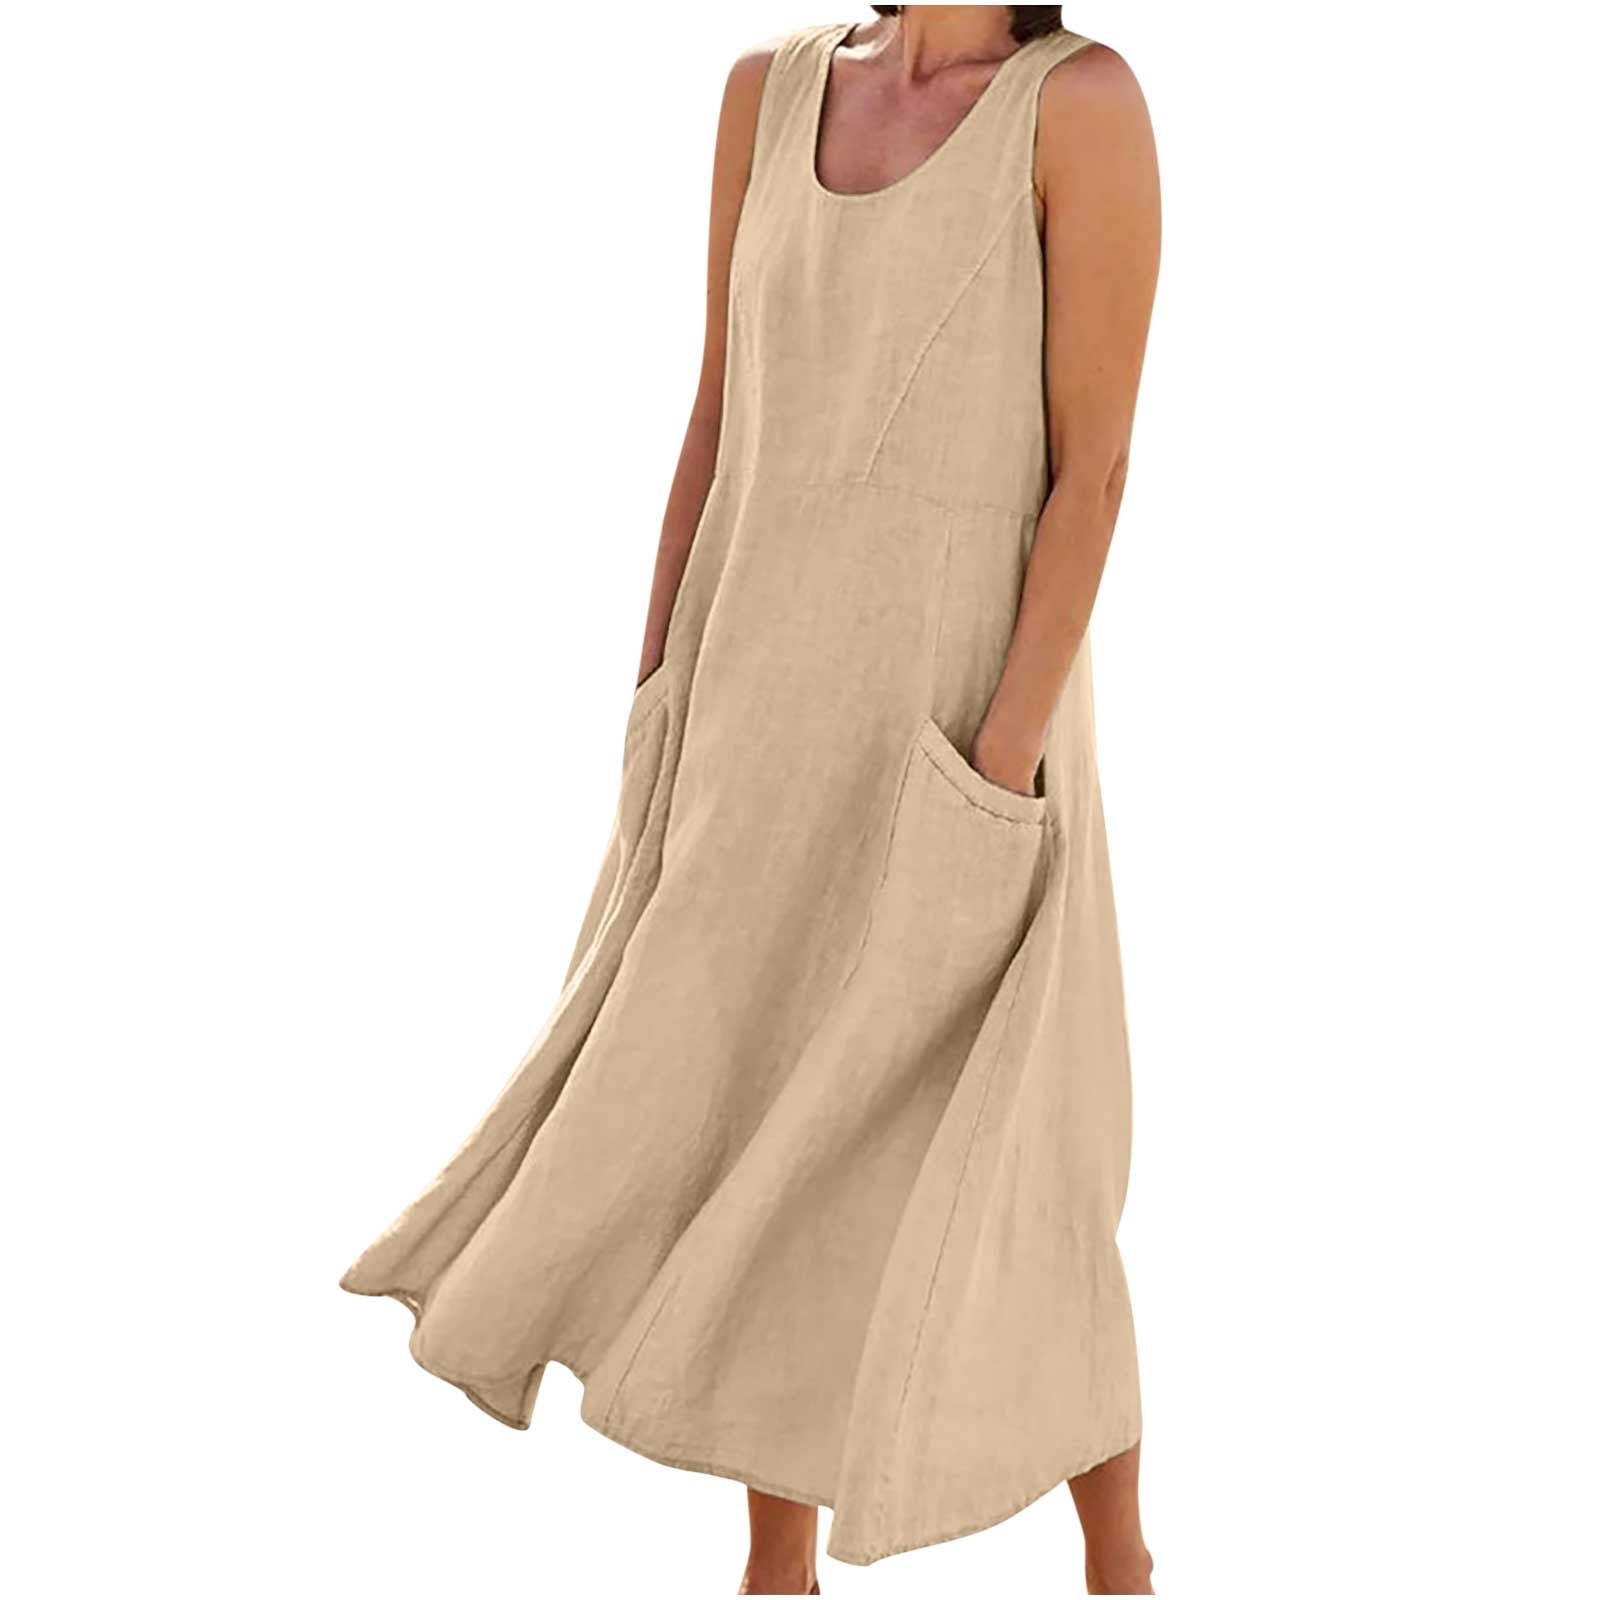 Oversized Linen Dress Comfy Sleeveless, Plus Size Sundress Available in 30  Colors, Linen Volume Soft Tunic. Women Clothing Mama Dress/ Tunic -   Norway